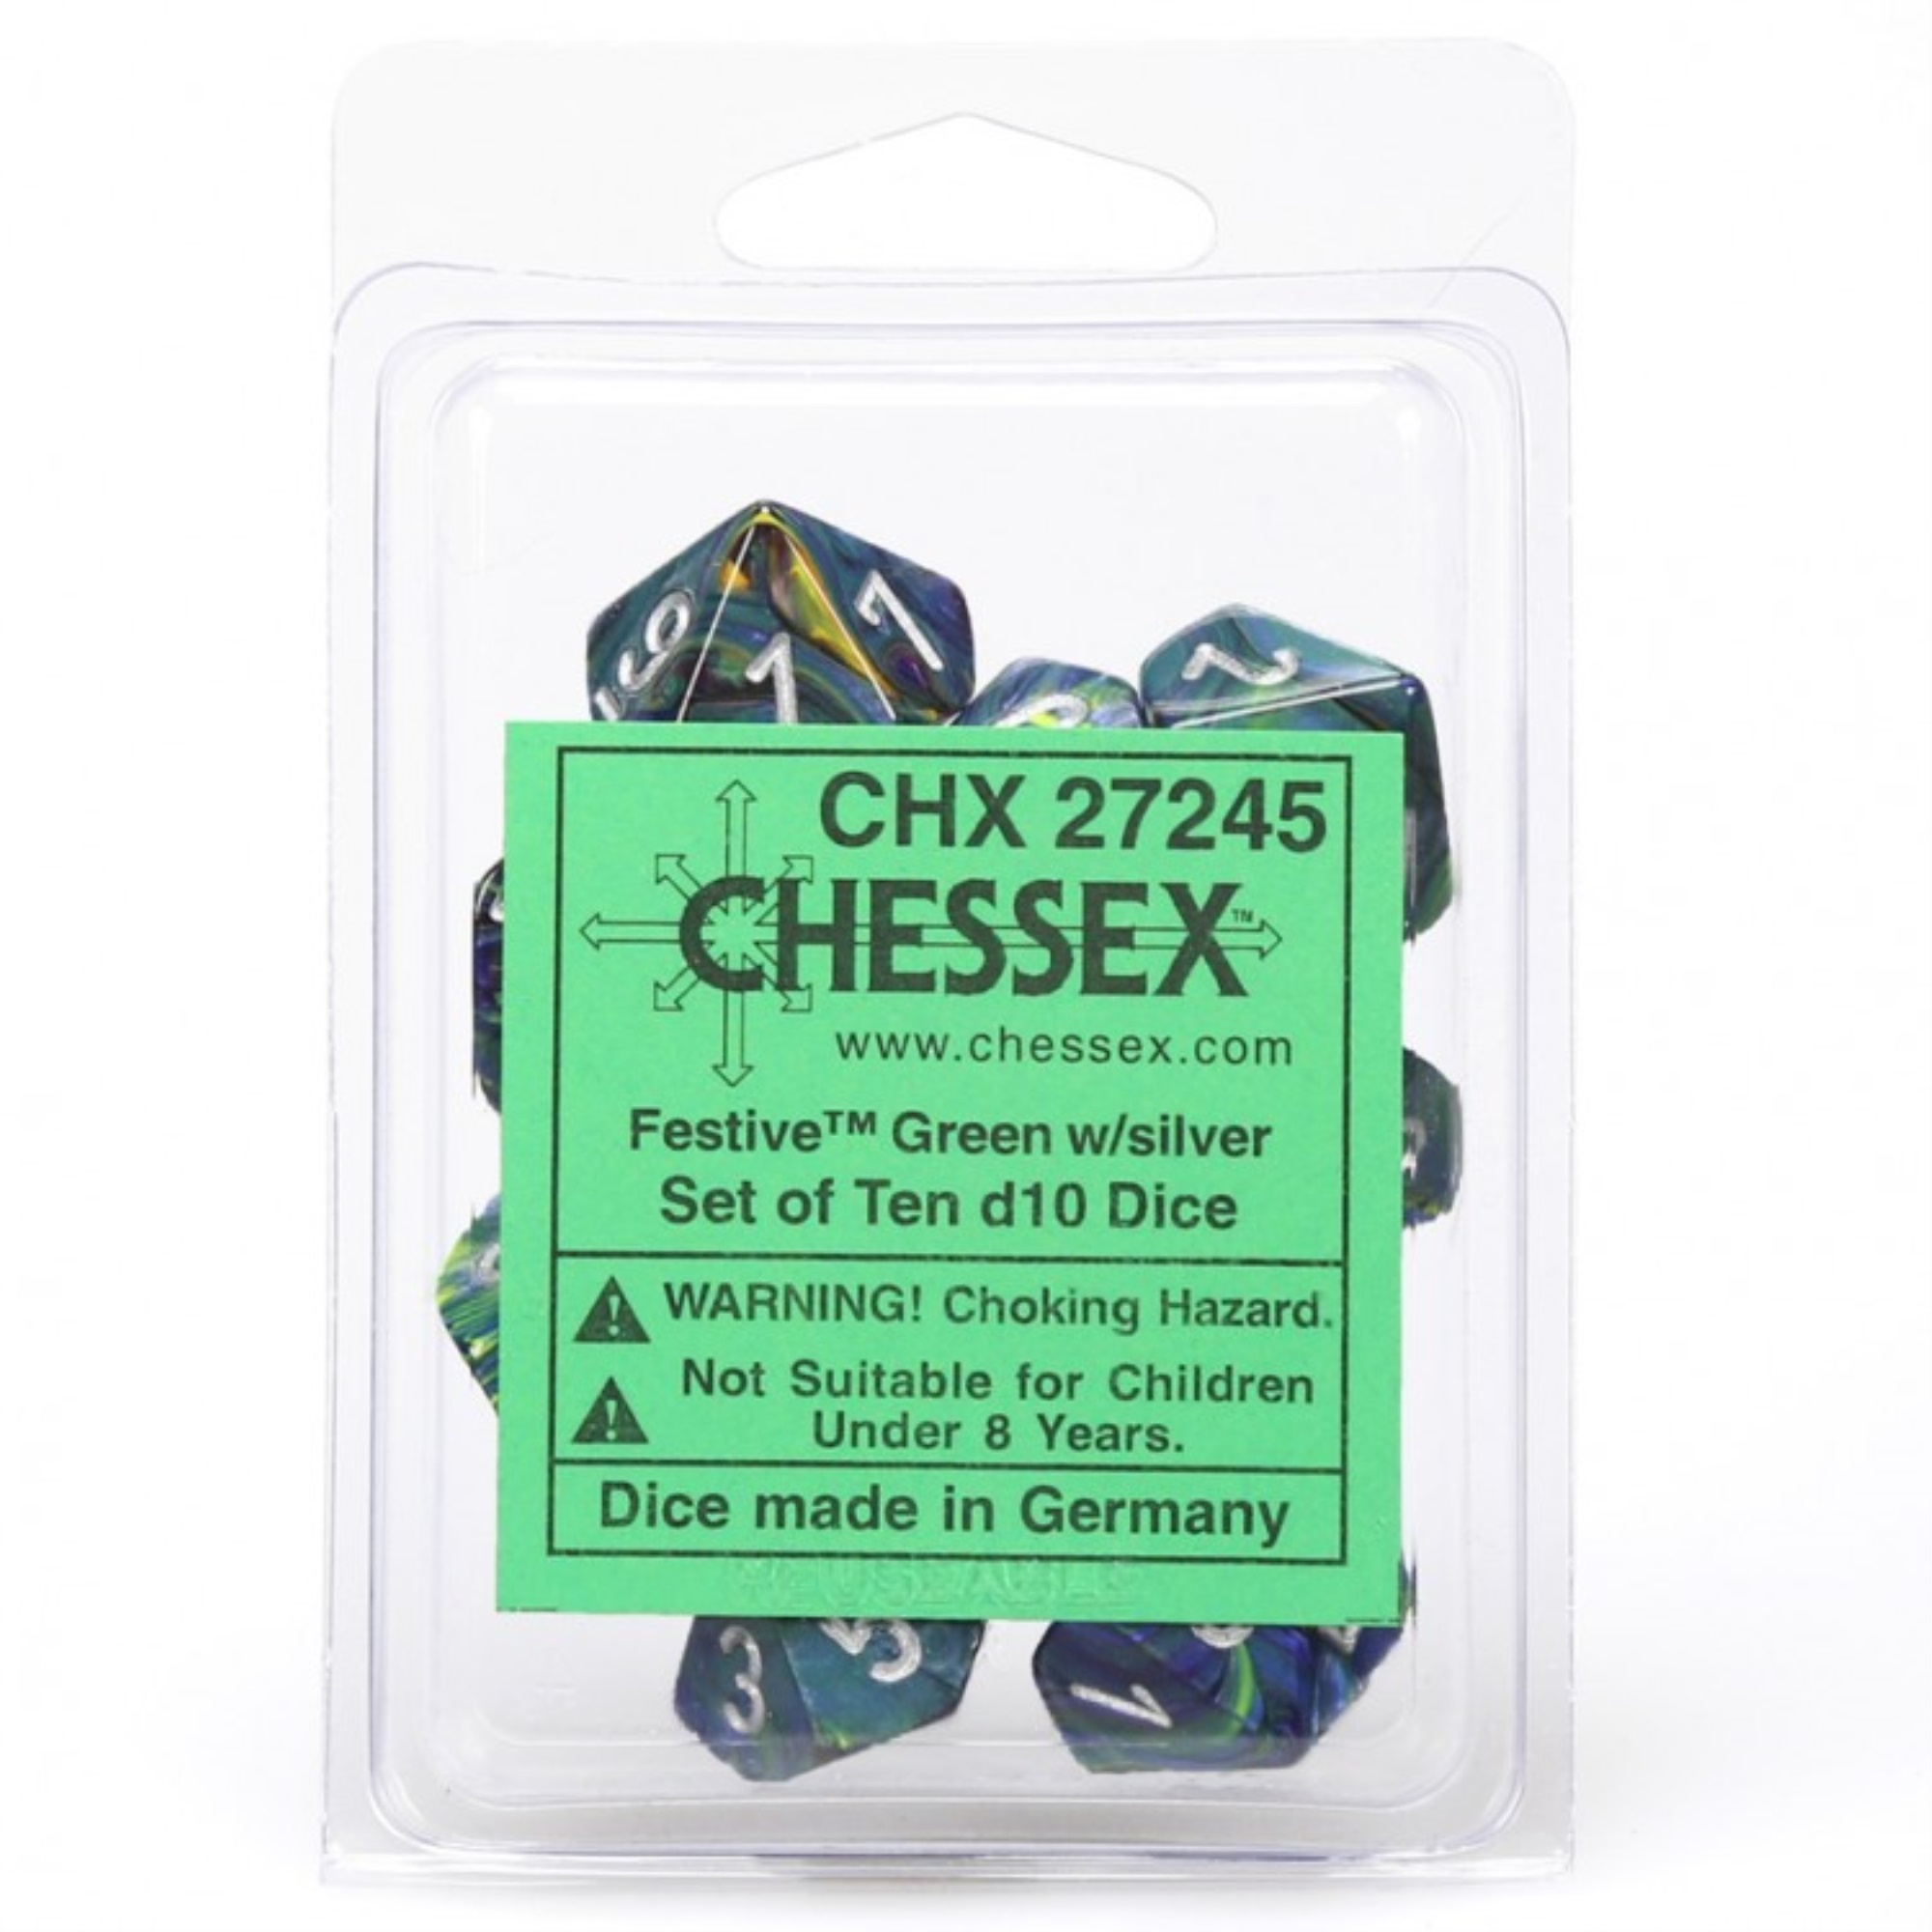 CHESSEX MANUFACTURING Chessex Dice - Festive - d10 Chessex D10 Green w/Silver (10)